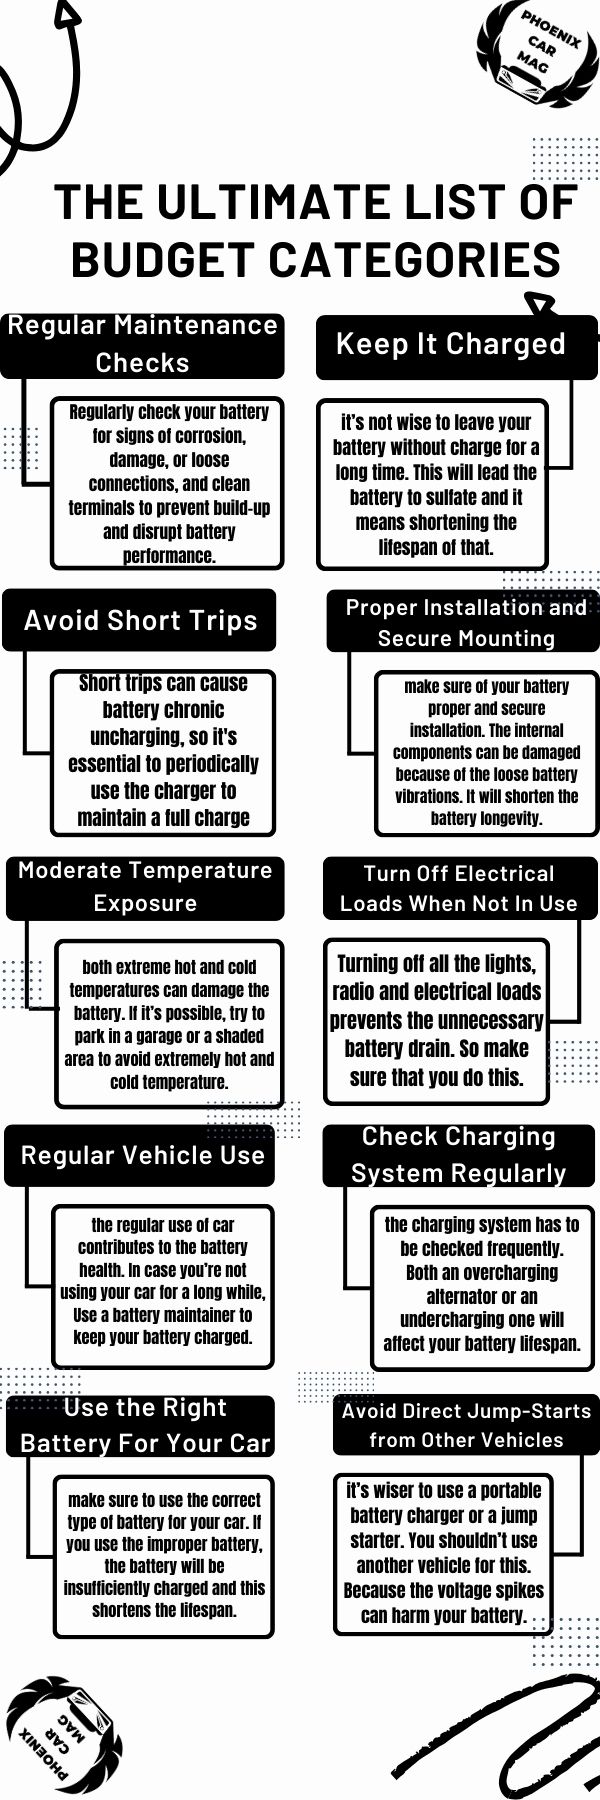 infographic of How to Extend the Life of Your Car Battery?